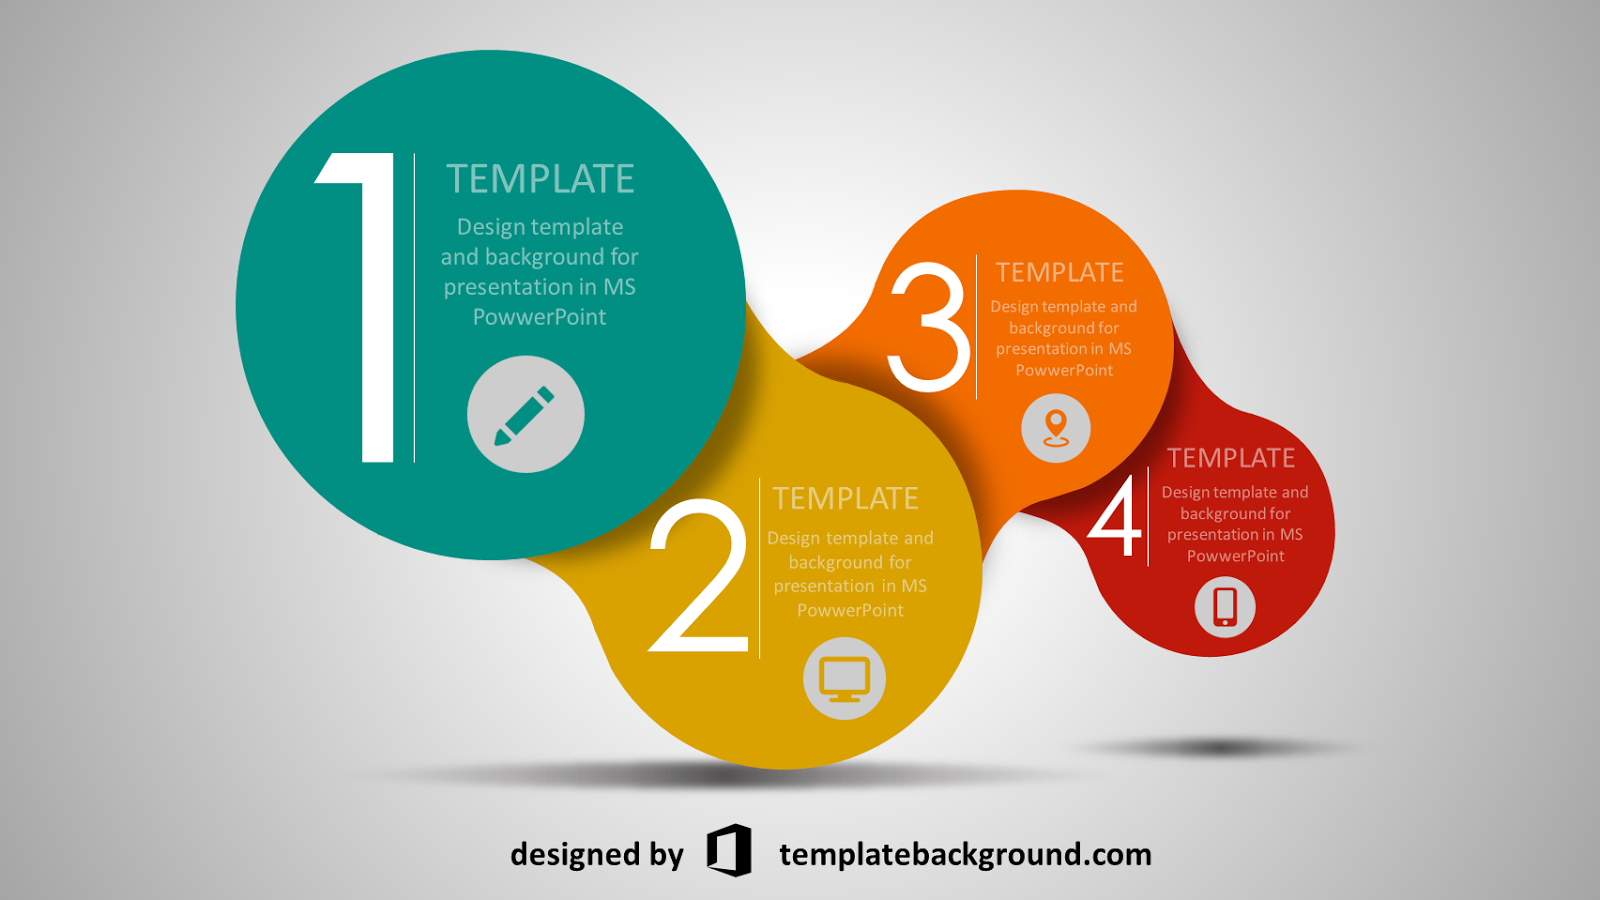 Animated Templates For Powerpoint 2010 Free Download Theme Throughout Powerpoint Animated Templates Free Download 2010